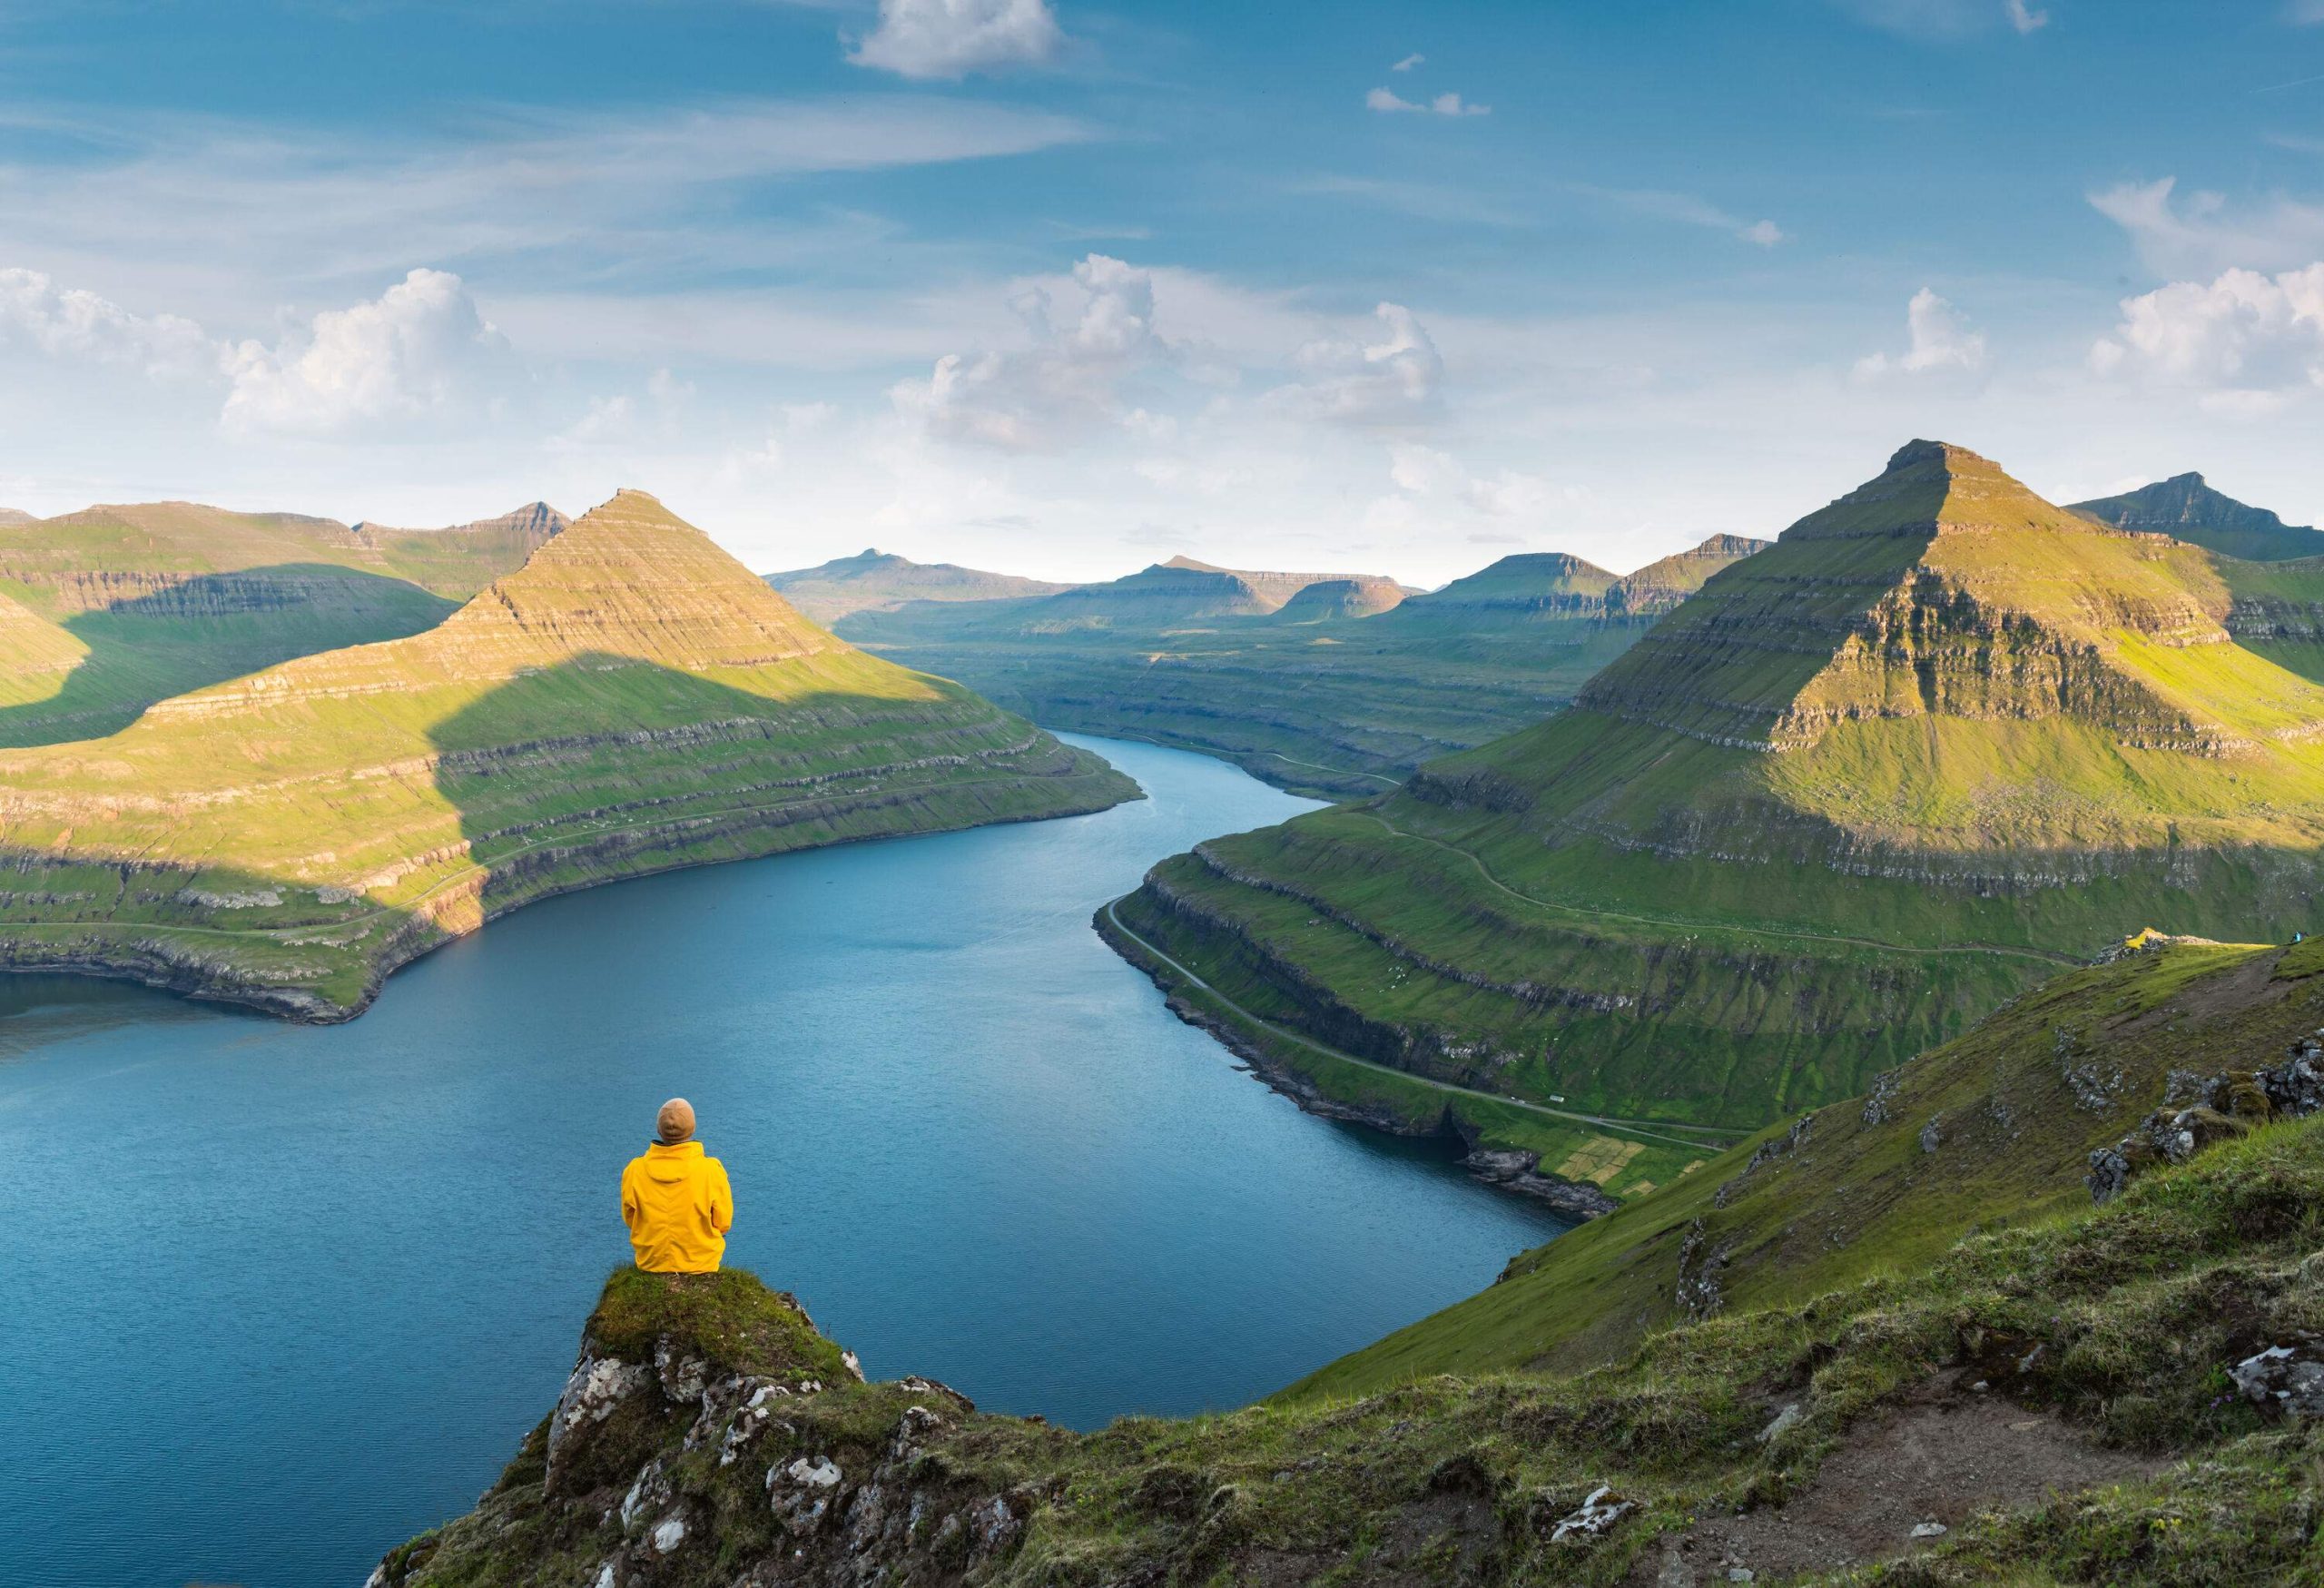 A person in a yellow jacket sits on a narrow cliff overlooking the calm waters below the crags of the island.